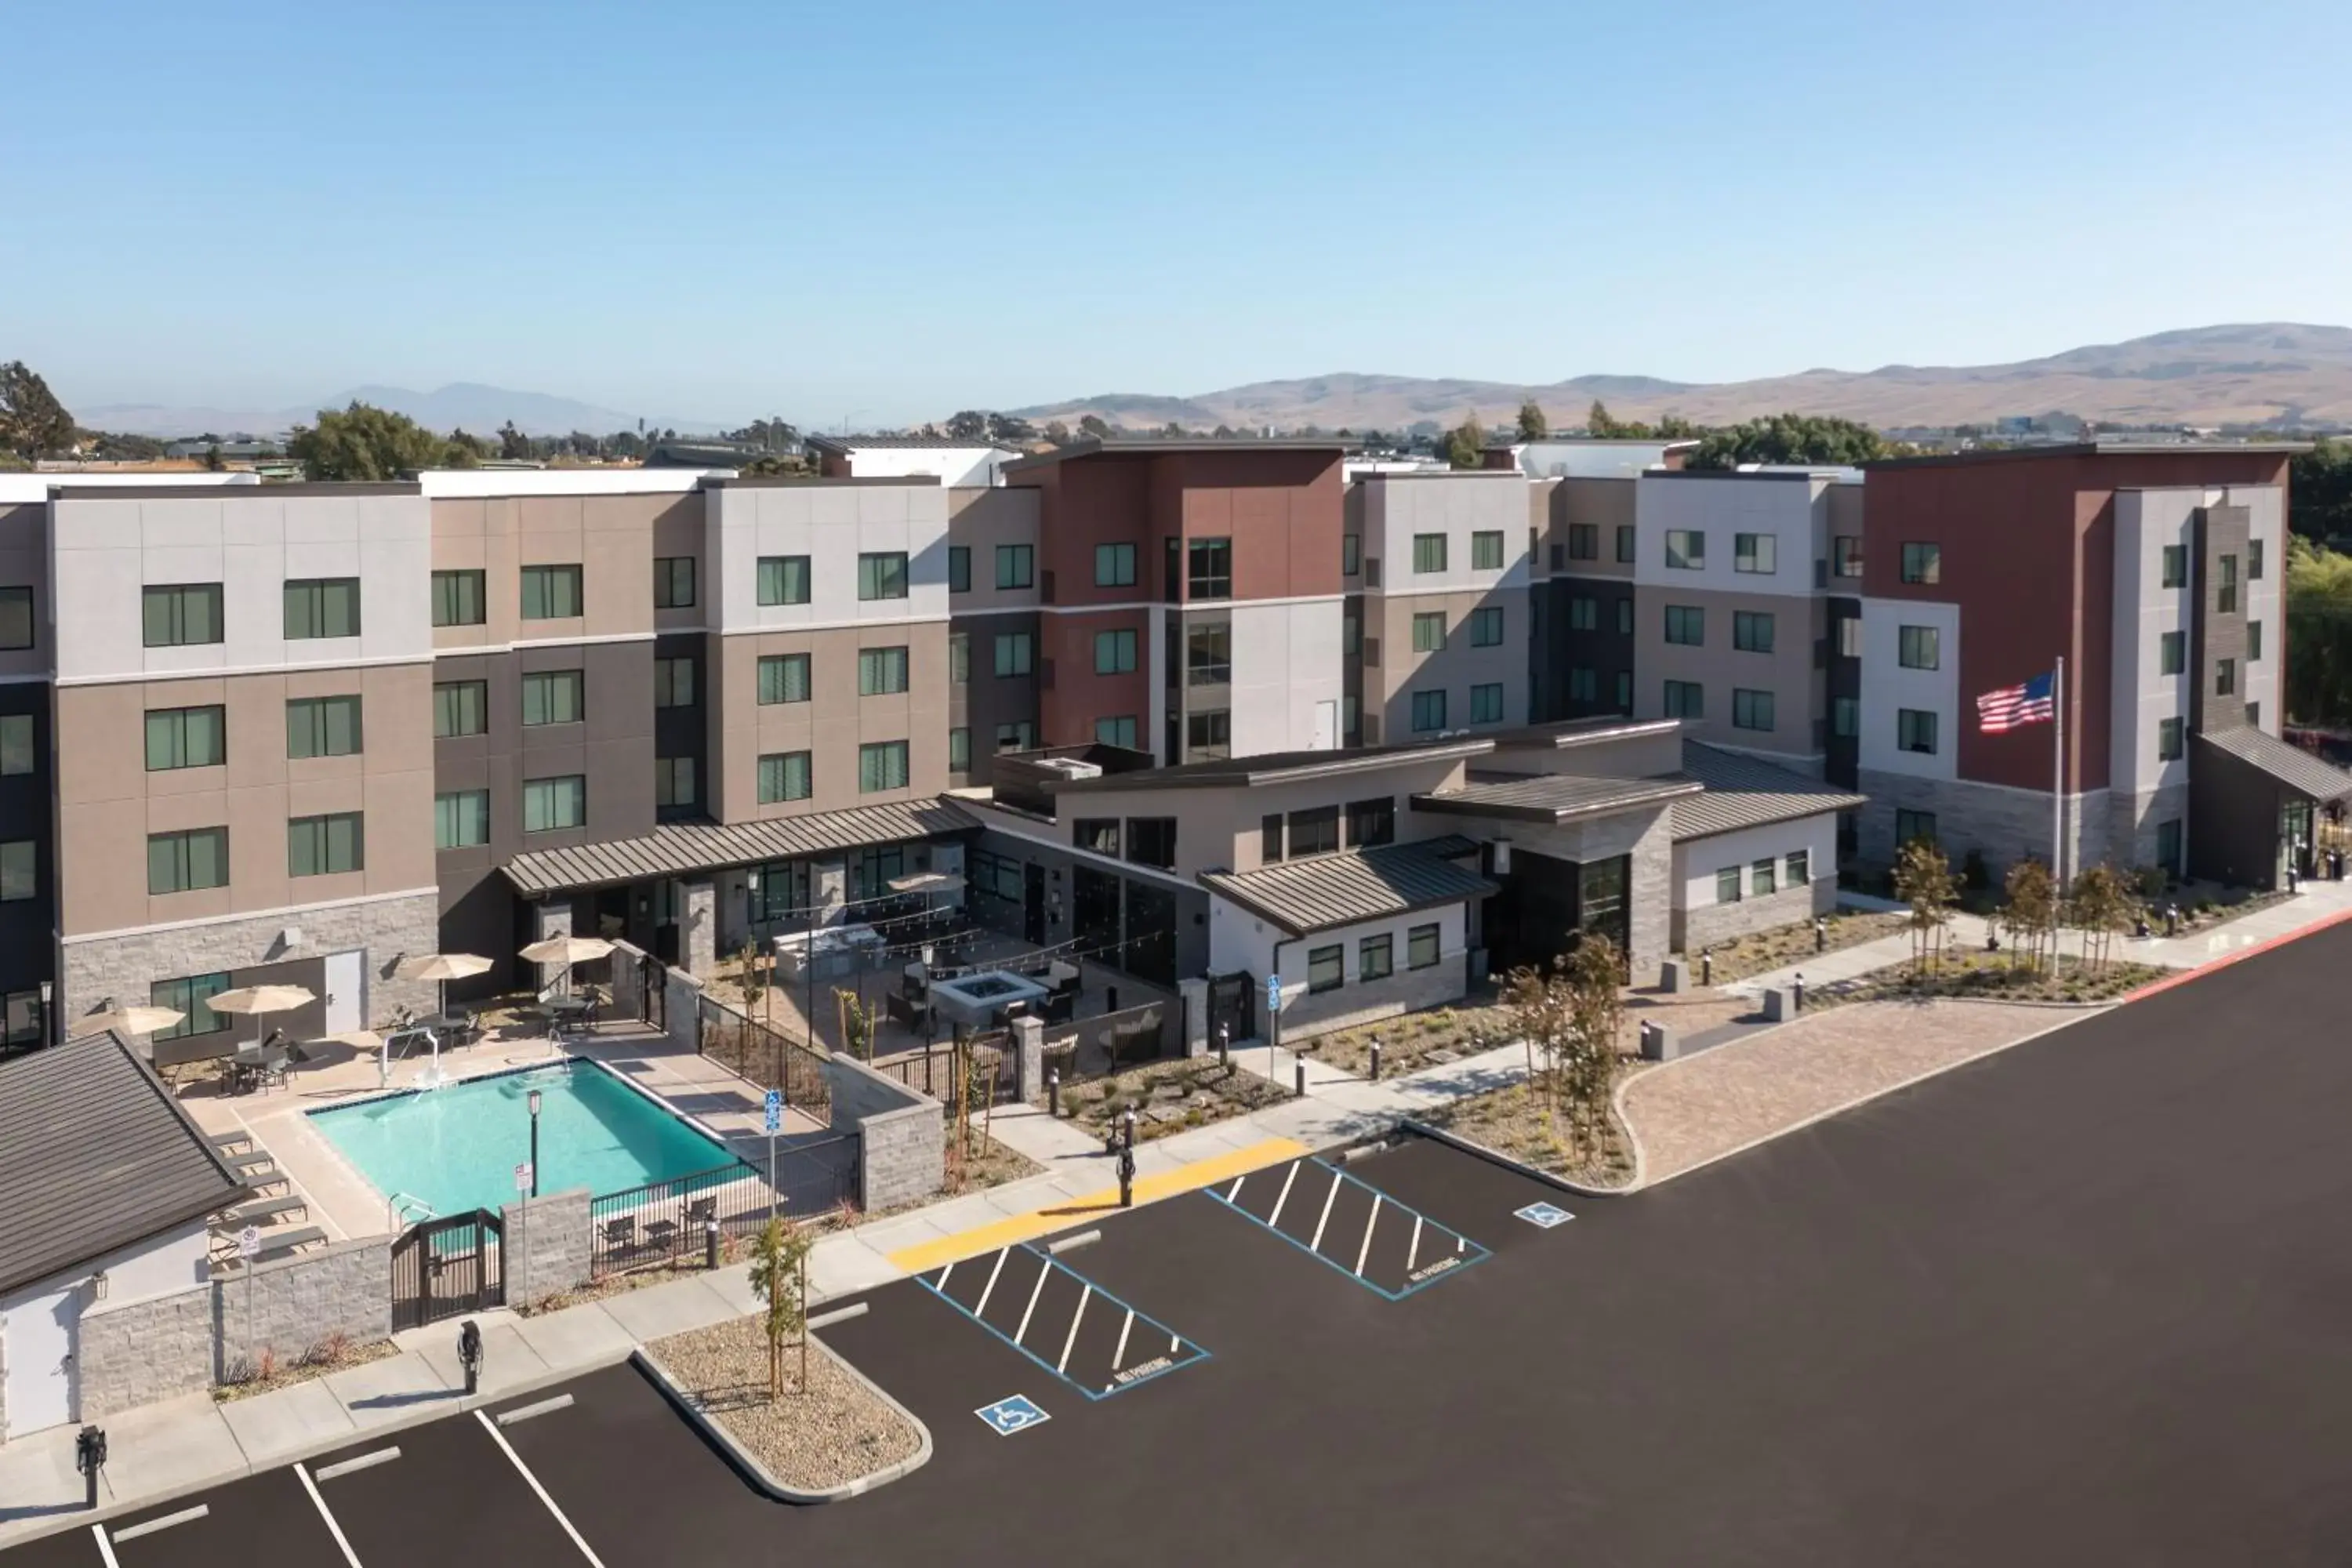 Property building, Pool View in Residence Inn by Marriott Fairfield Napa